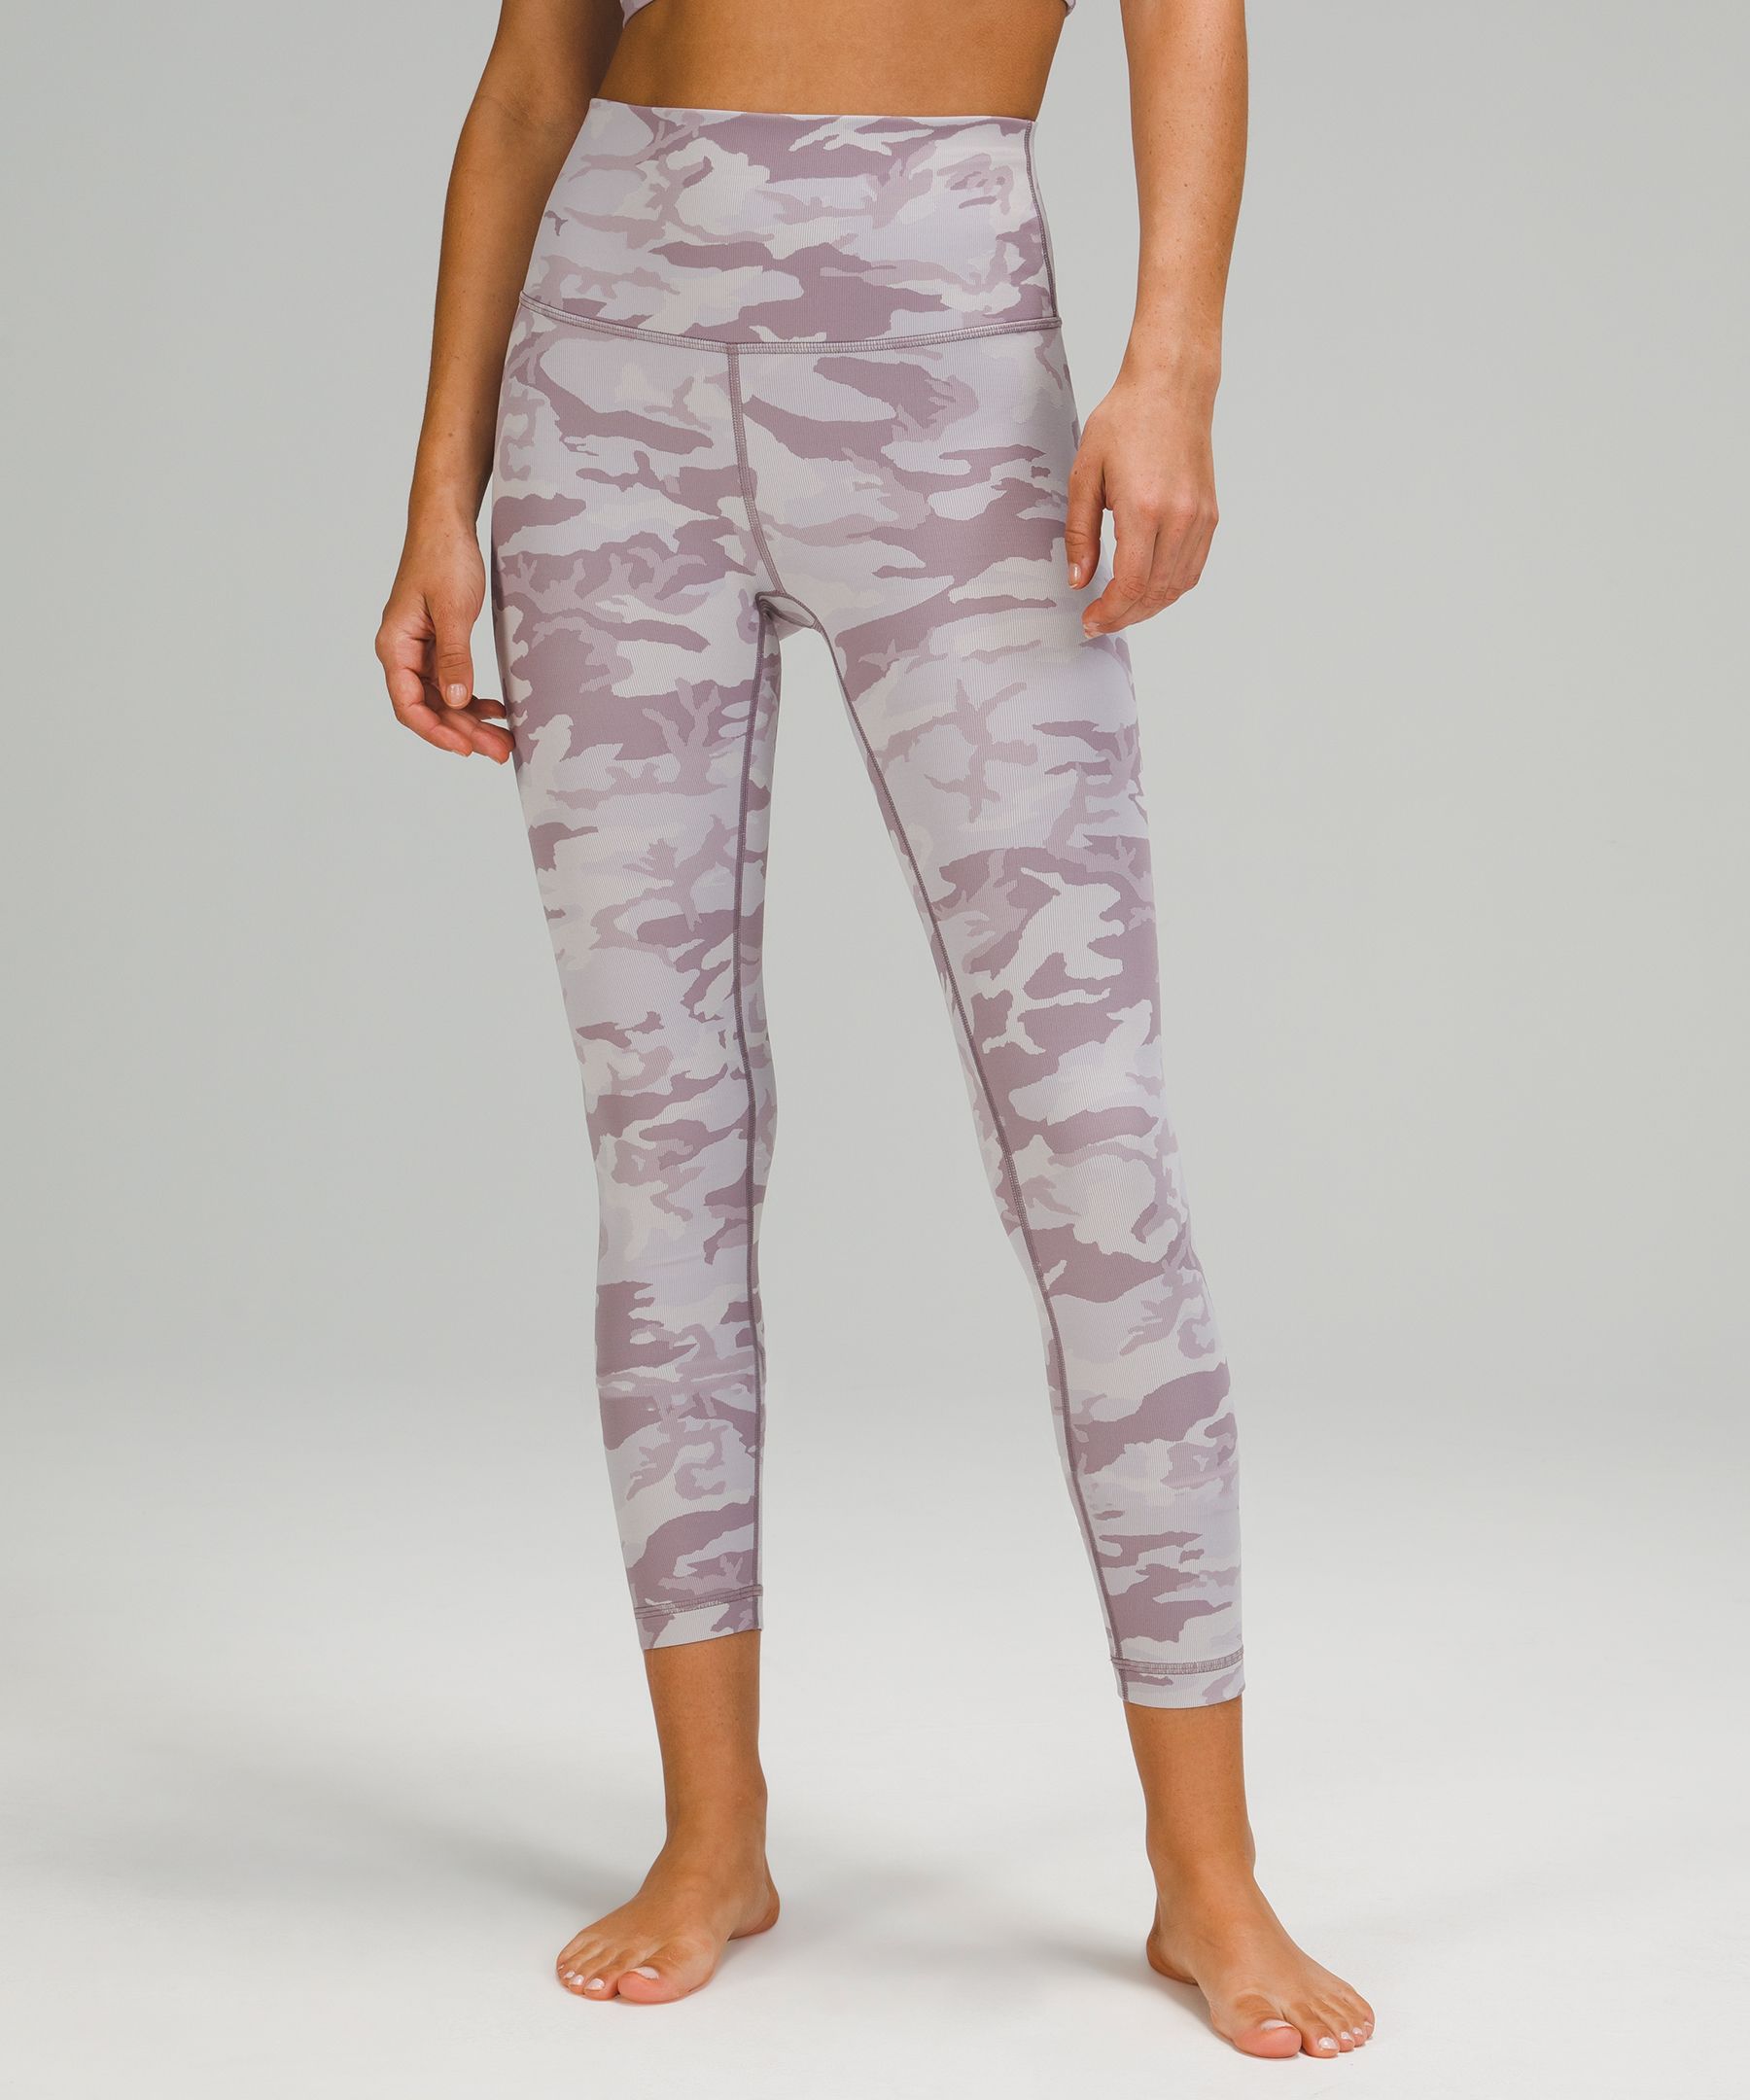 Lululemon Wunder Under High-rise Tight 25" *luxtreme In Printed